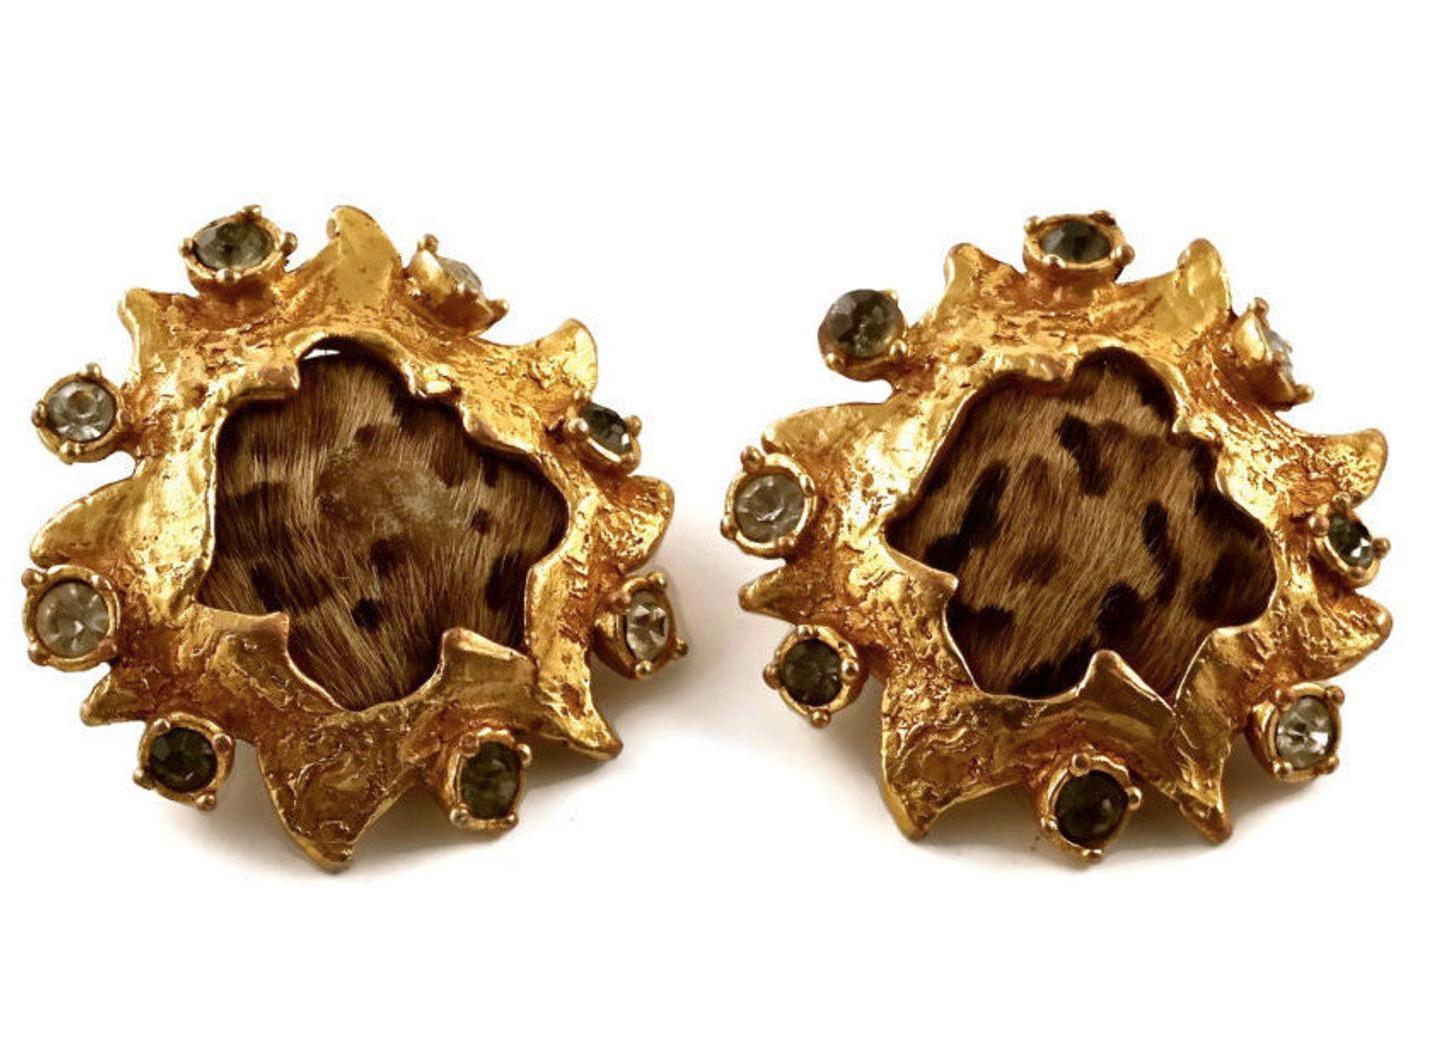 Vintage CHRISTIAN LACROIX Leopard Pony Hair Baroque Earrings

Measurements:
Height: 1 7/8 inches (4.76 cm)
Width: 1 6/8 inches (4.44 cm)

Features:
- 100% Authentic CHRISTIAN LACROIX.
- Baroque style earrings with clear and gray rhinestones.
-